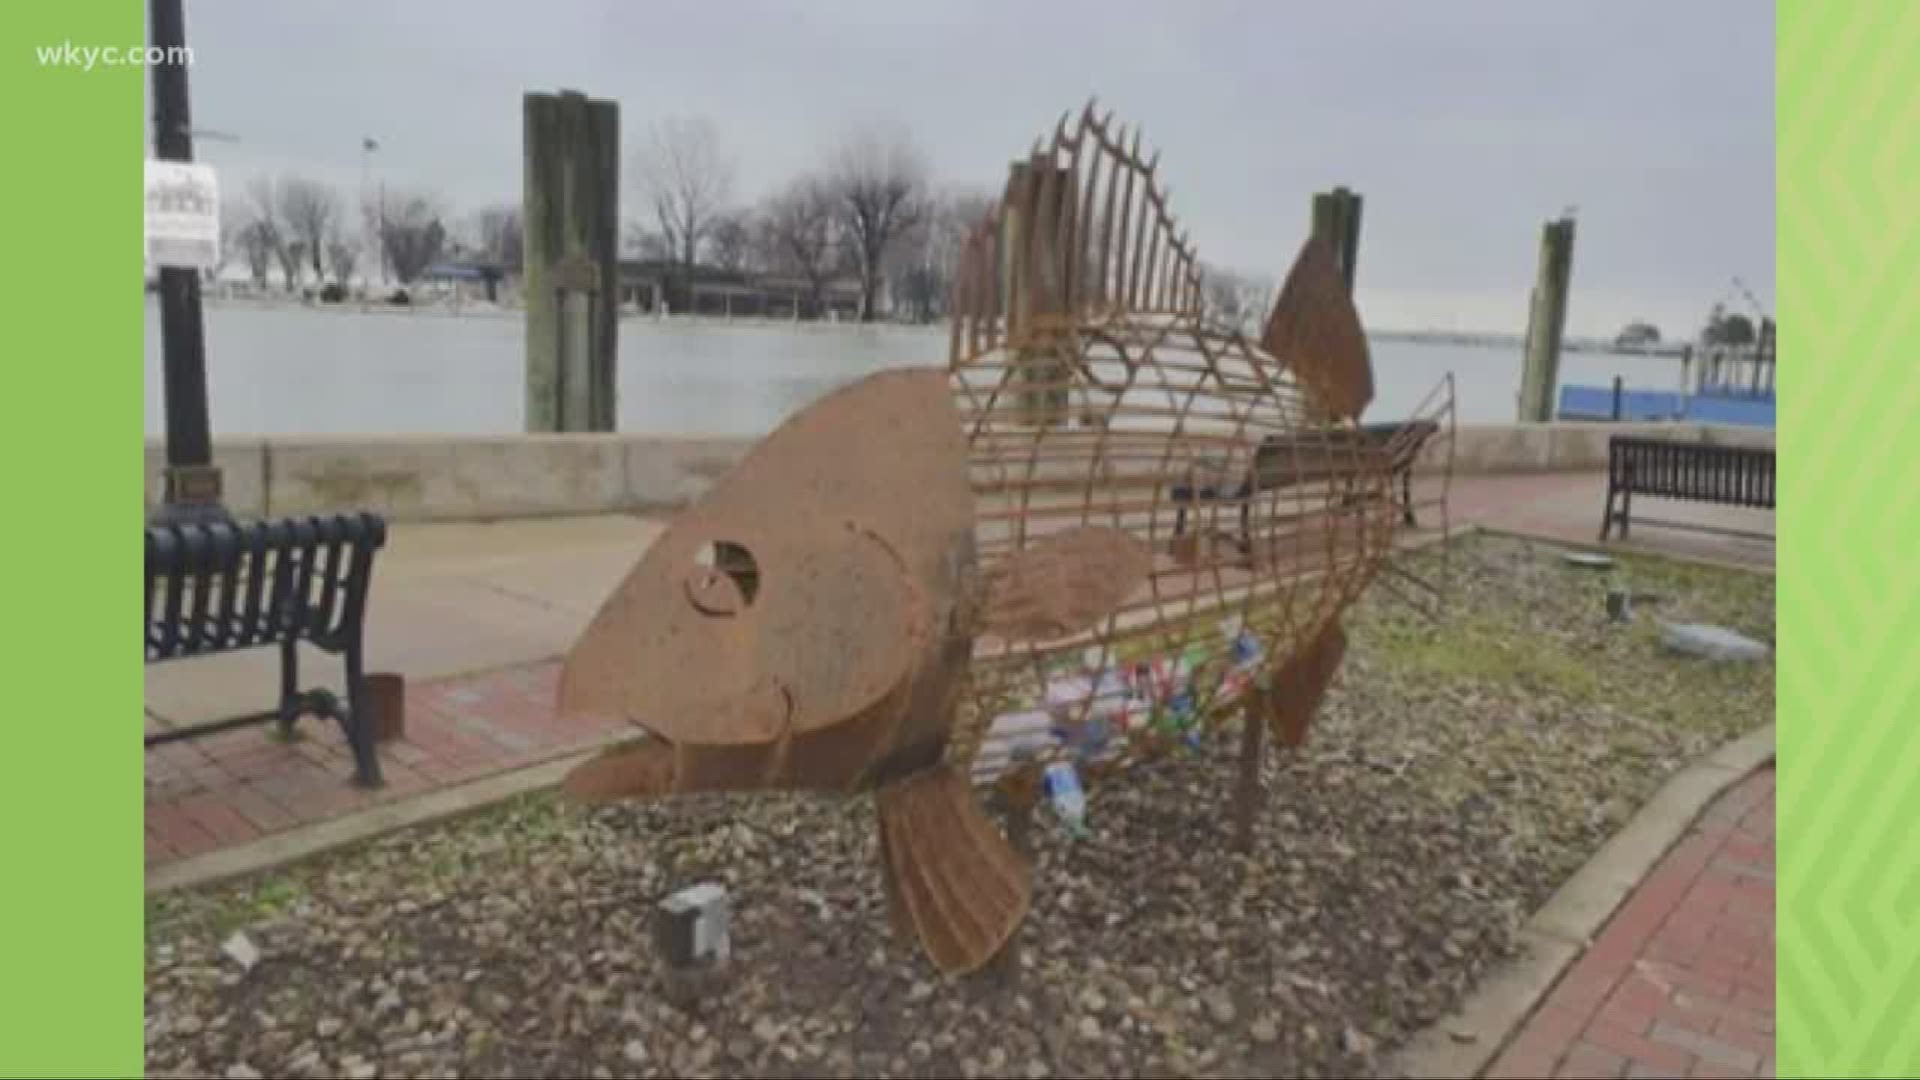 Take a look at this big fish! It's actually a trash container to recycle plastic.